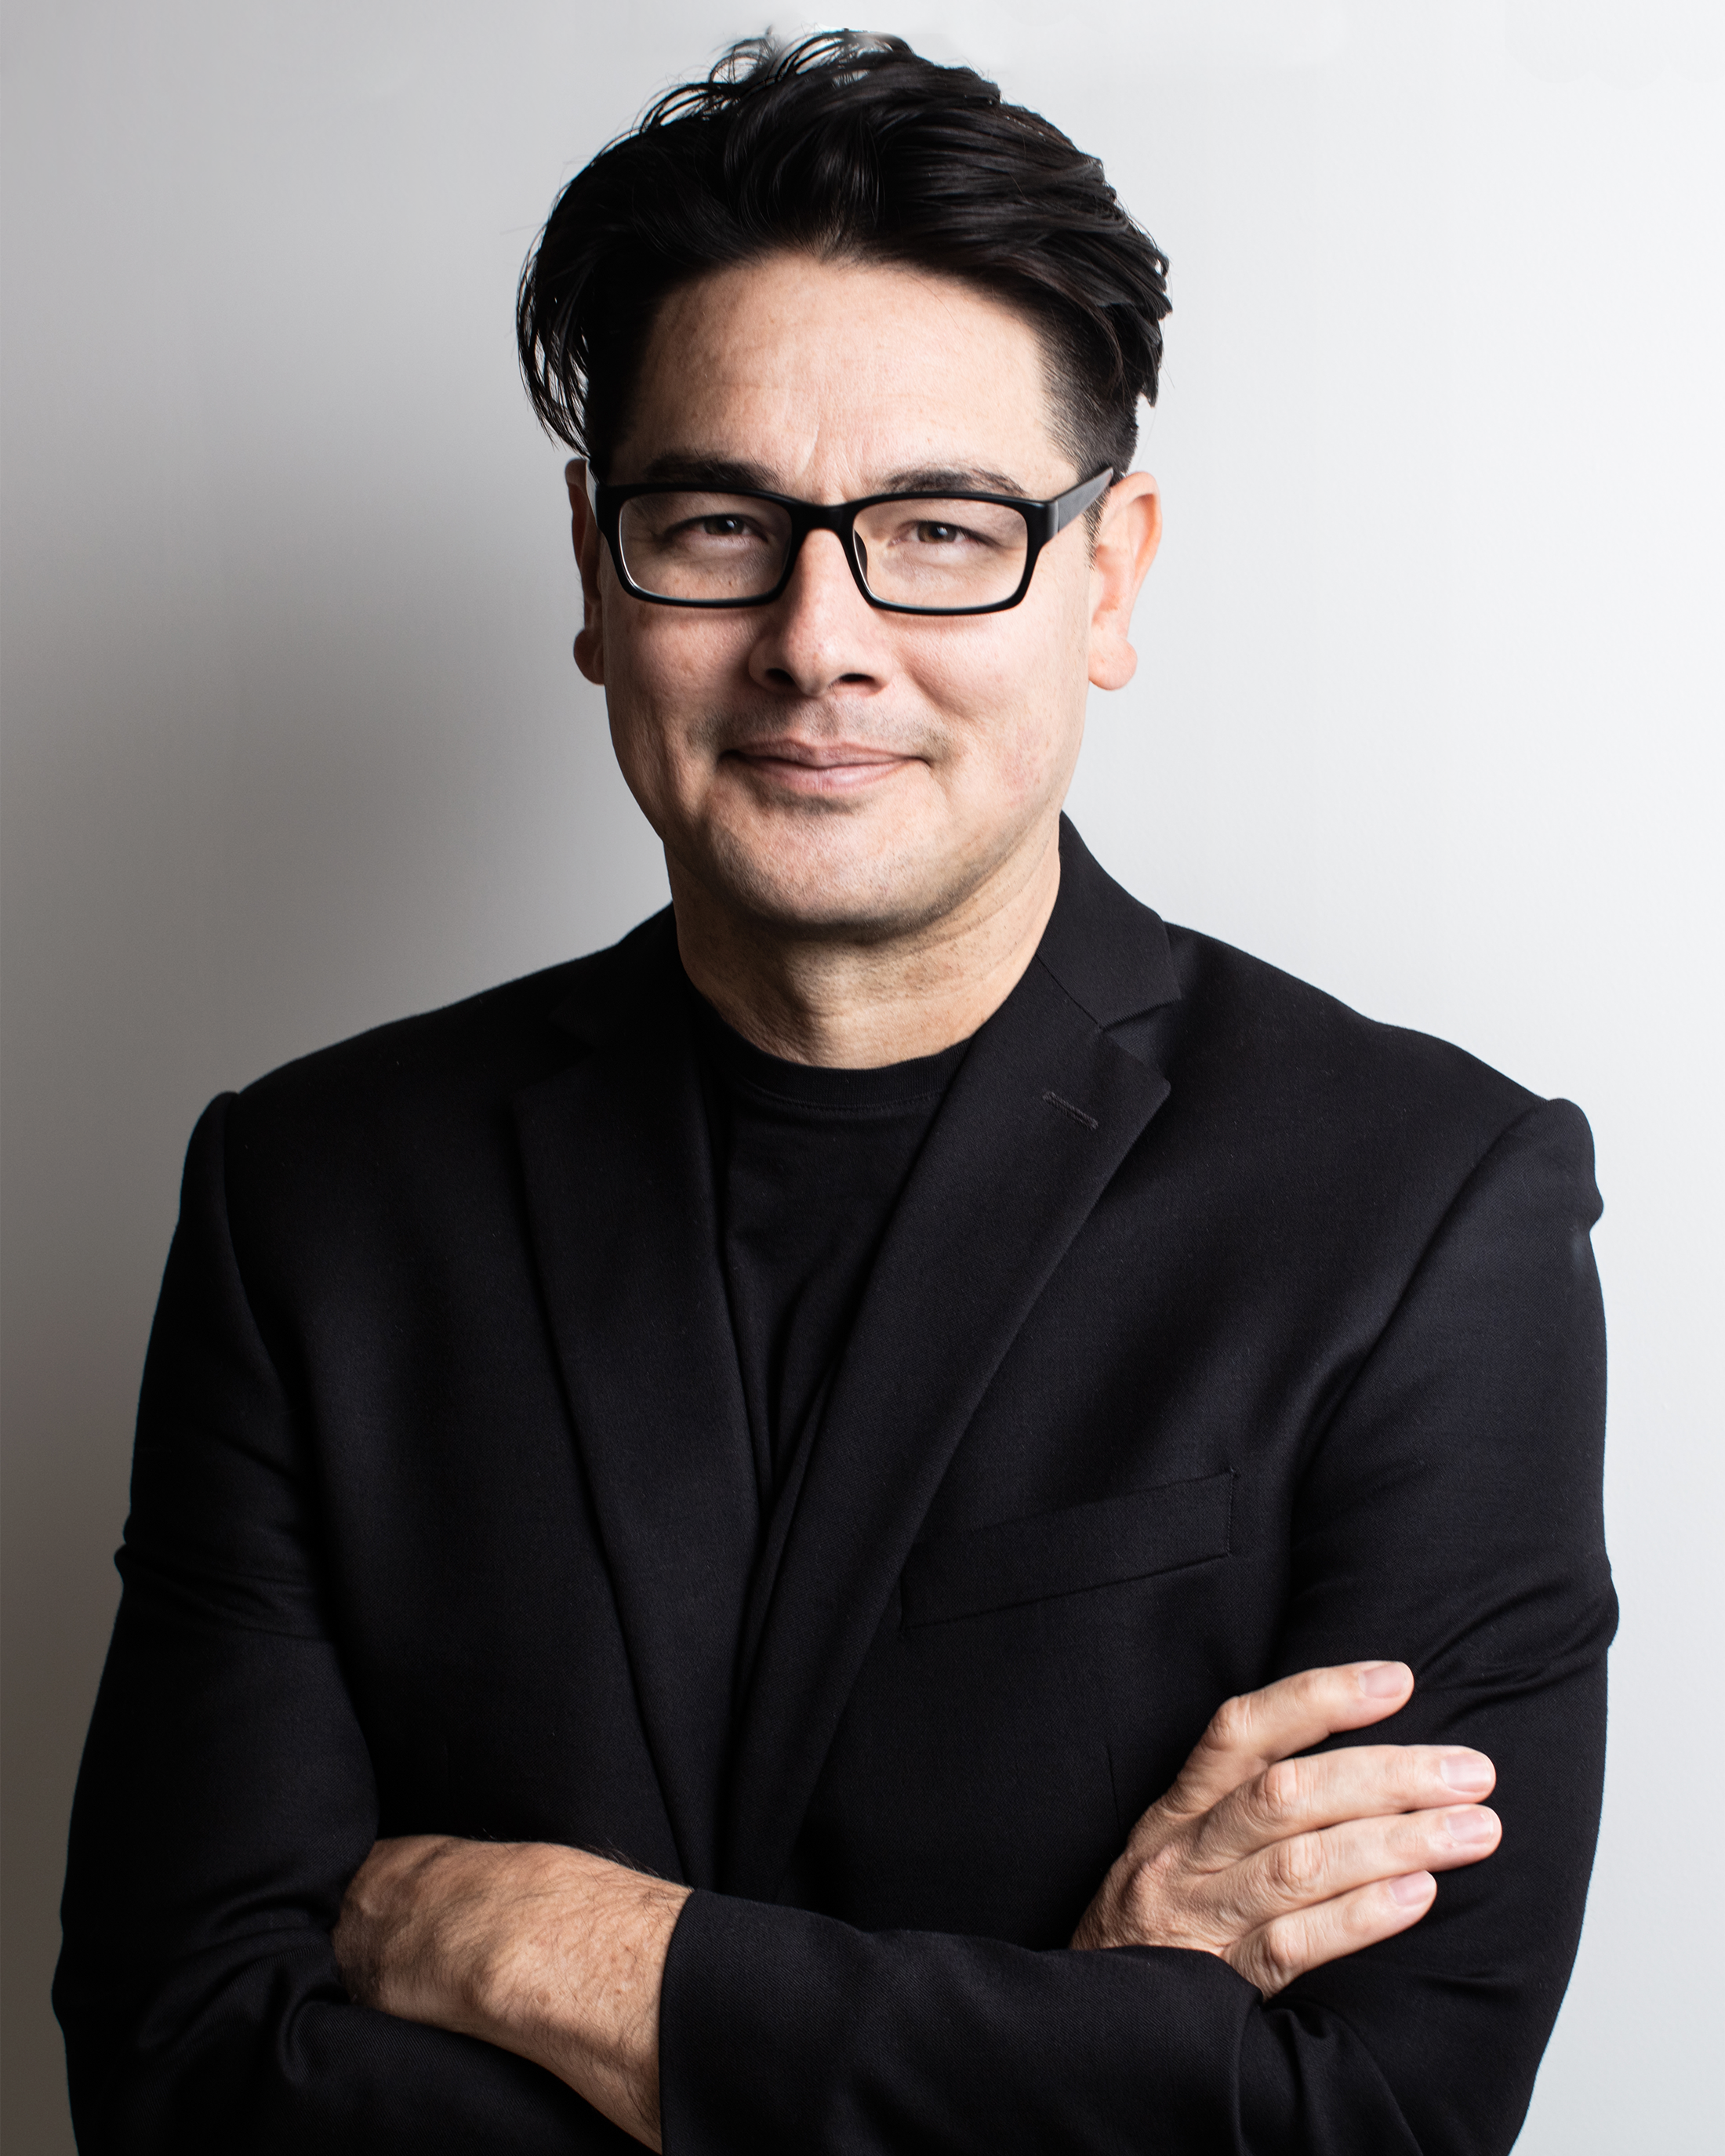 headshot of a man with short black hair, glasses, and suit